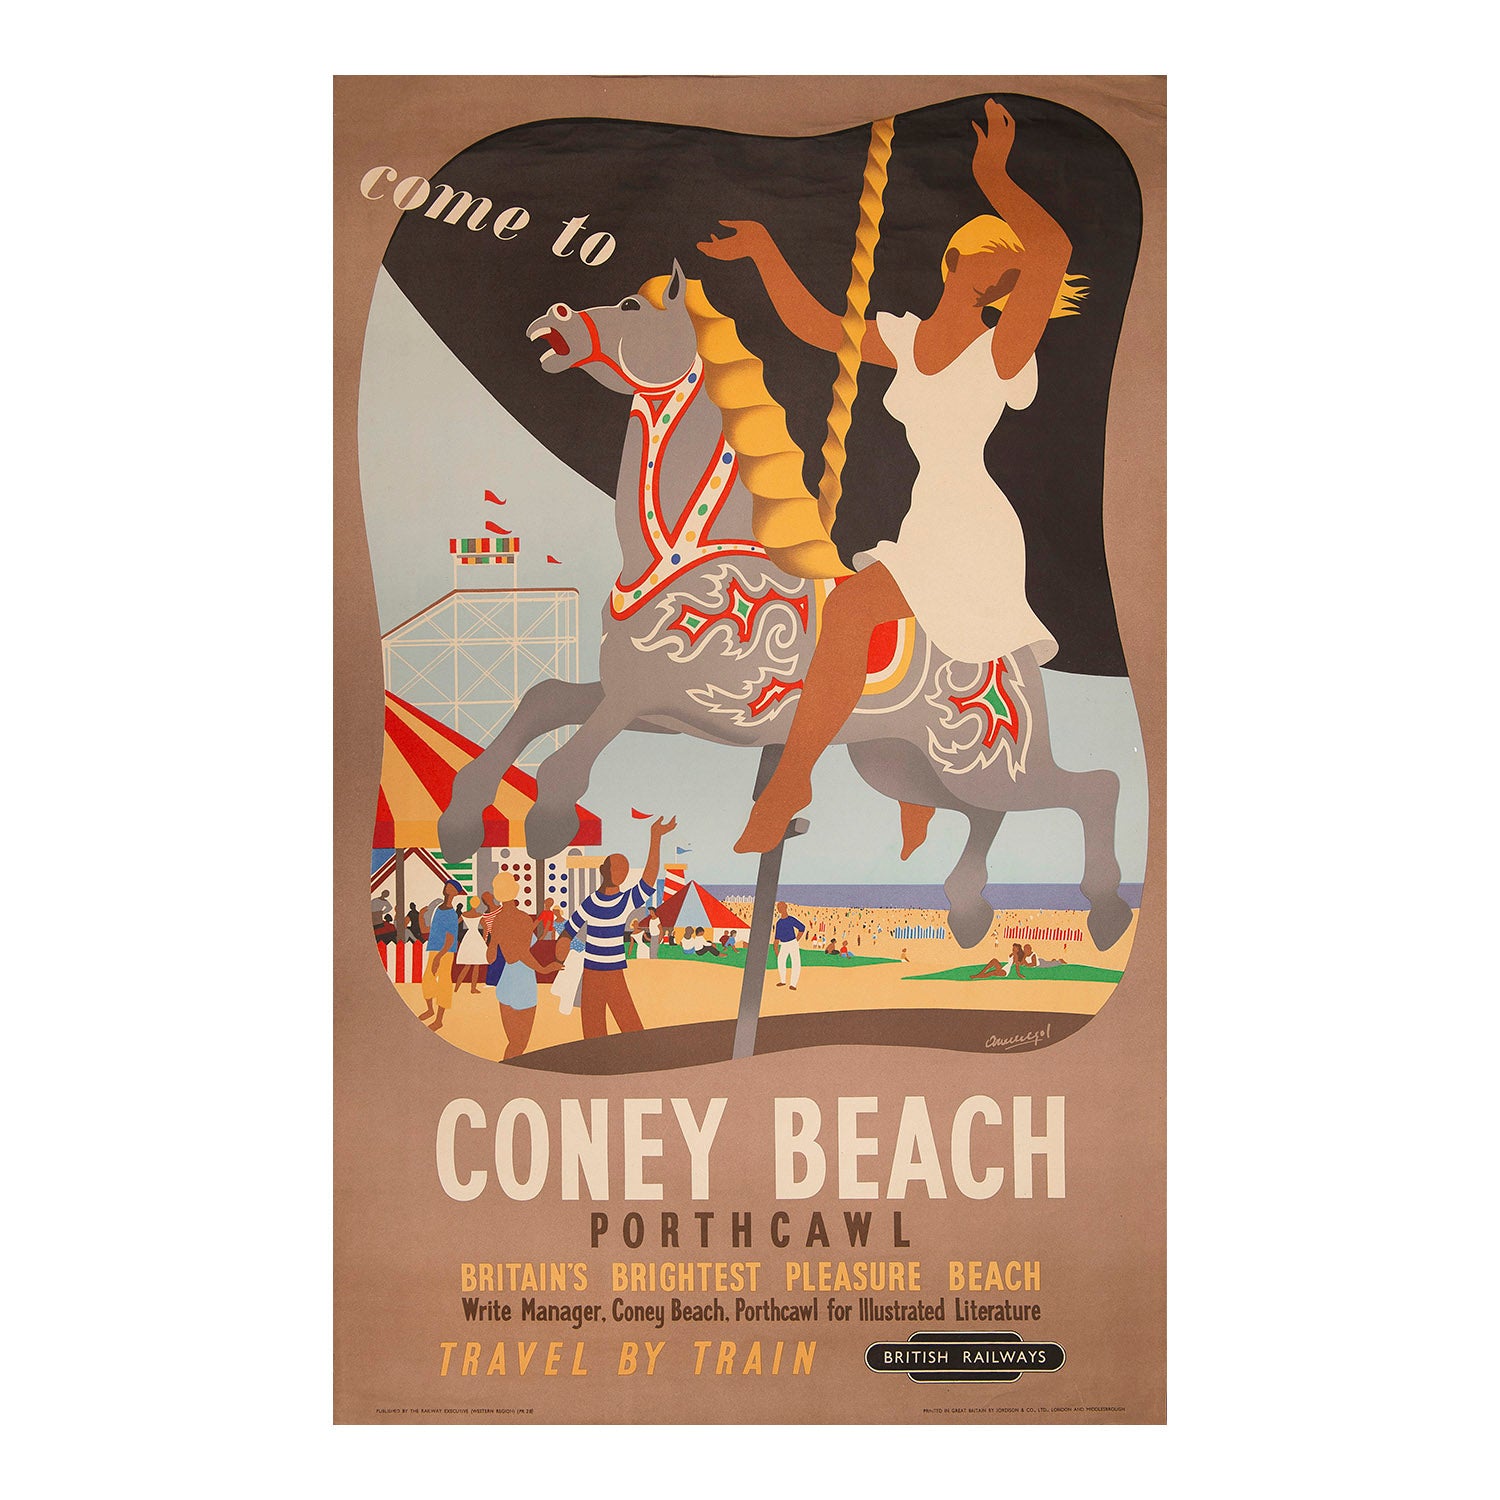 Railway Executive (Western Region) poster, Come to Coney Beach, Porthcawl, painted by the Spanish artist-designer Mario Hubert Armengol, 1952. The joyful image depicts a young woman riding a carousel horse with Coney Beach in the background